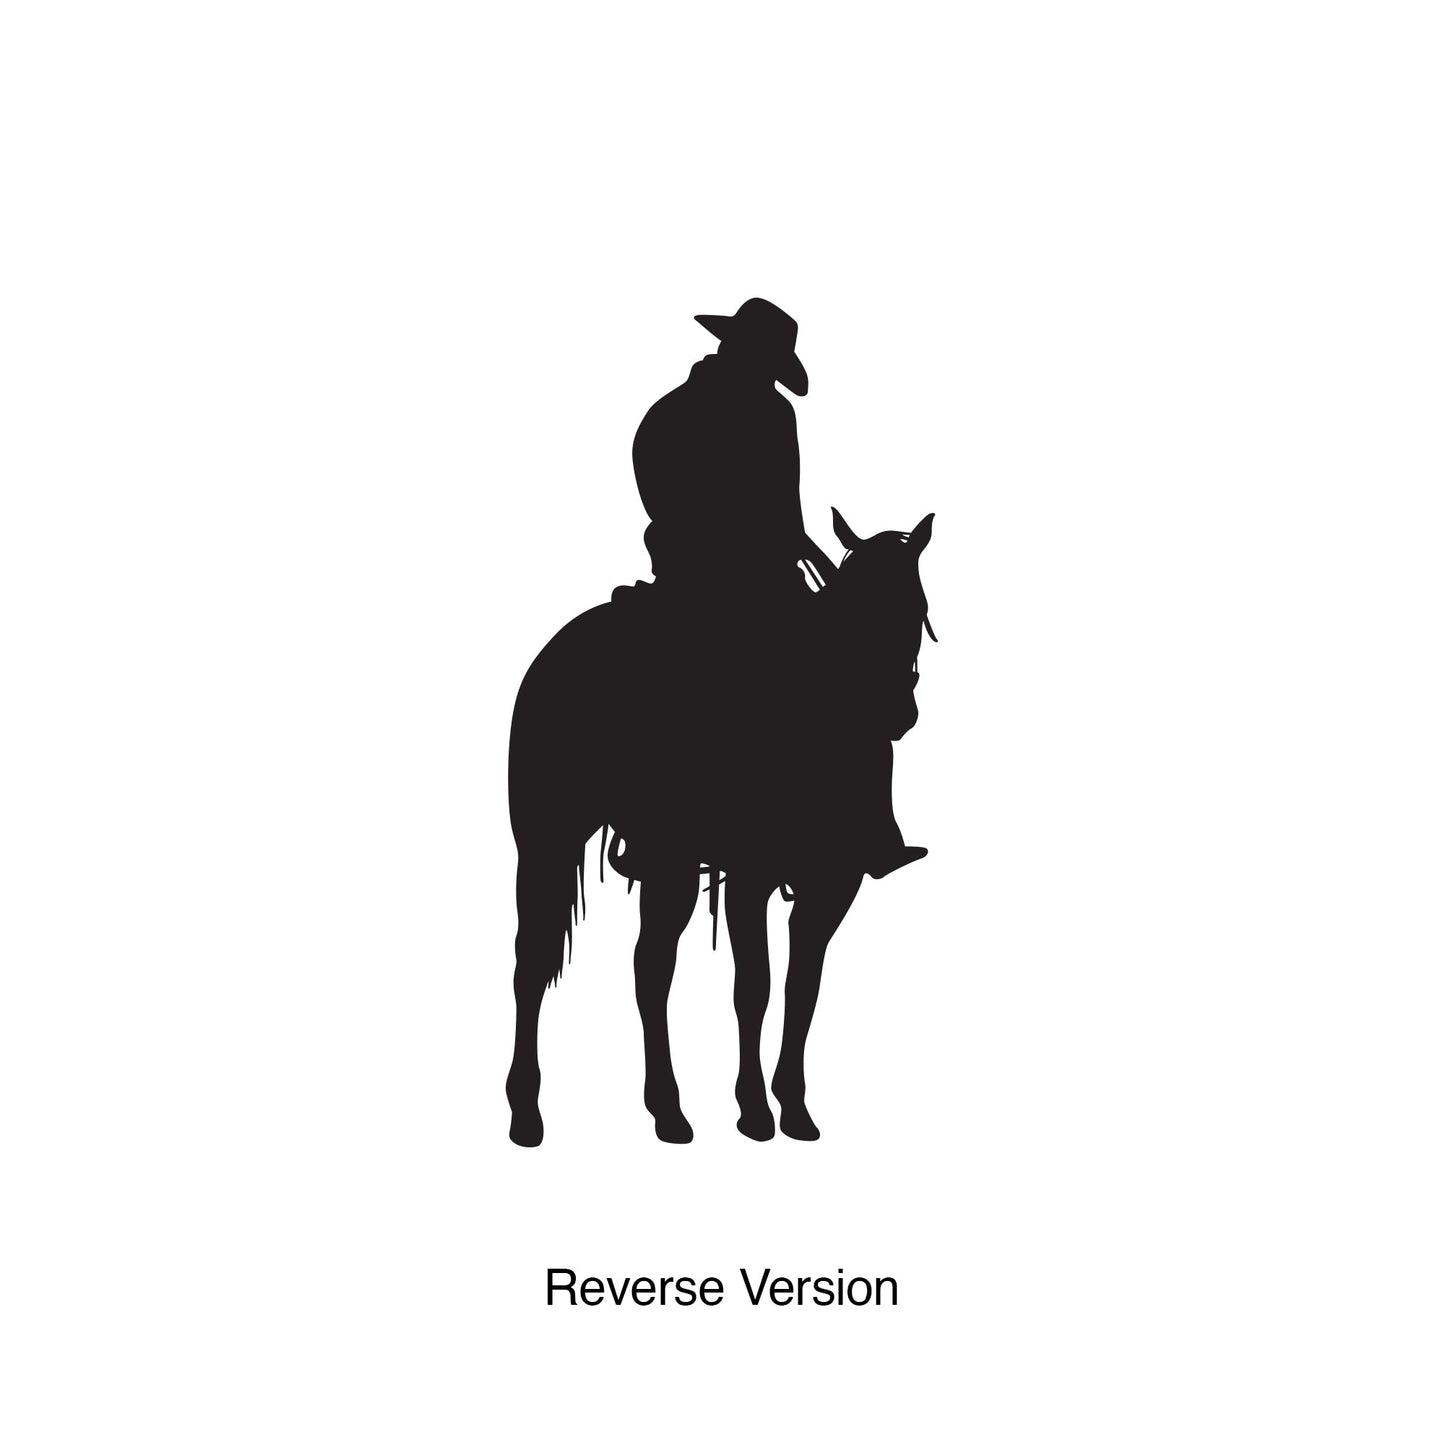 Cowboy on Horse Wall Decal. #567